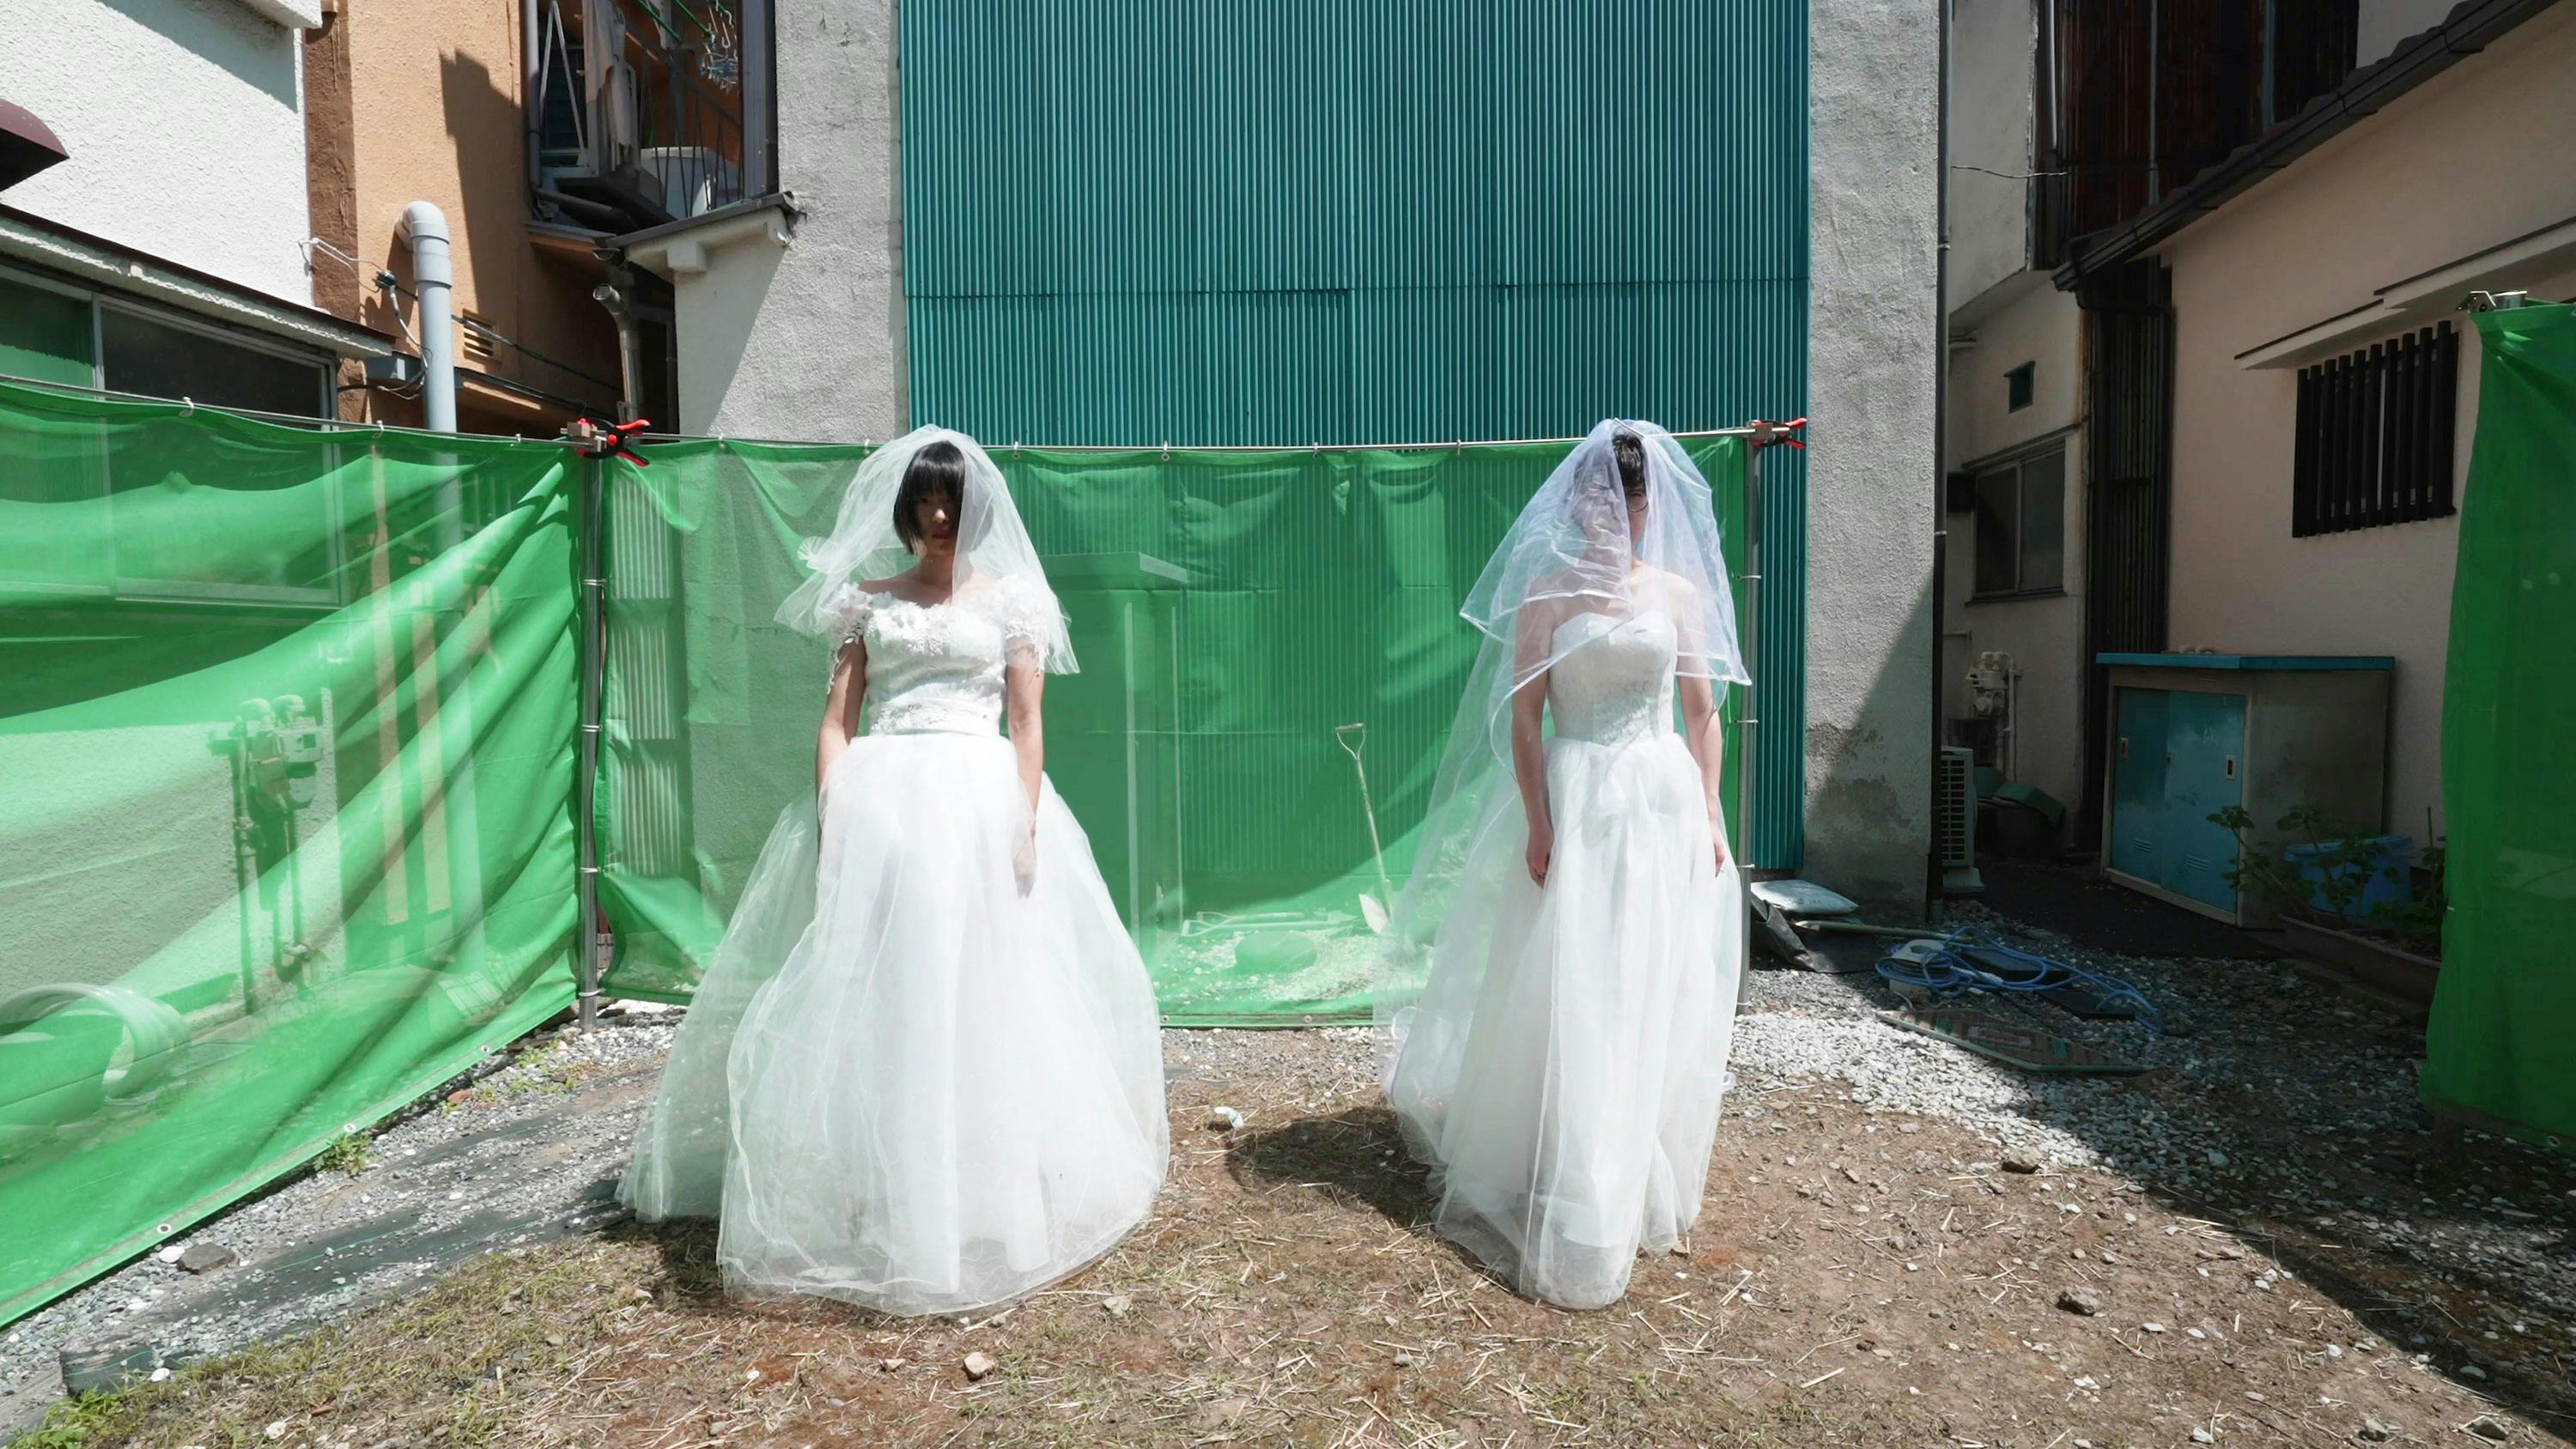 a film still that captures two women in identical bridal gowns with veils, standing in an outdoor space, enclosed by industrial buildings